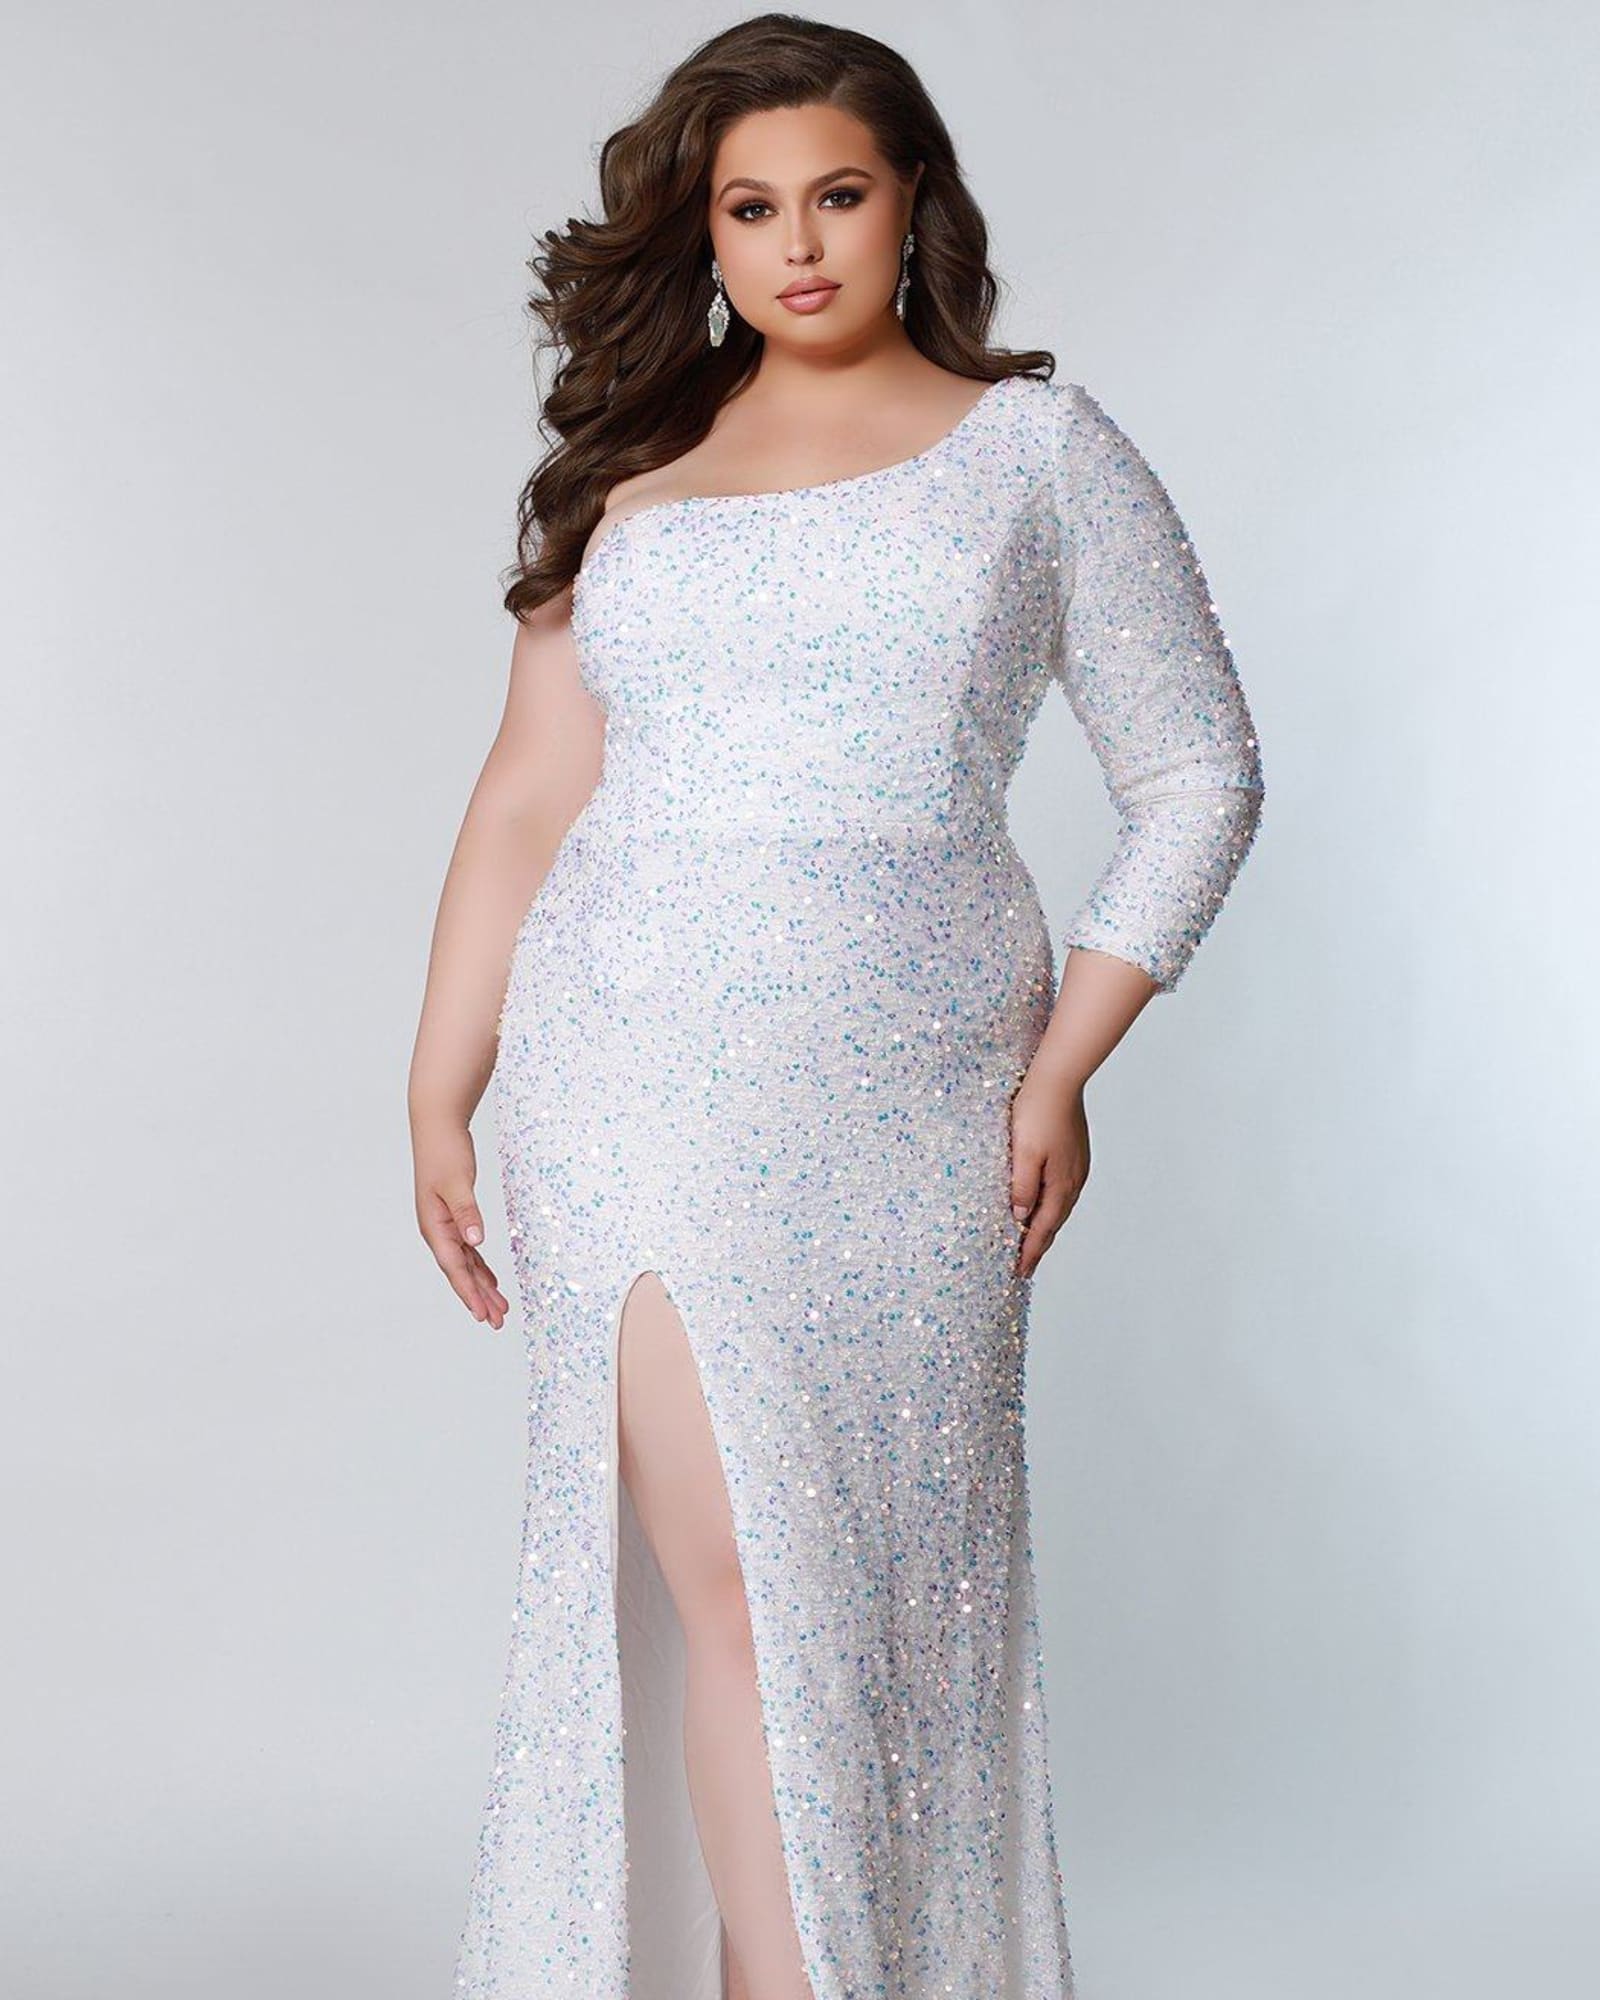 Flawless Formal Dress | Pearlescent